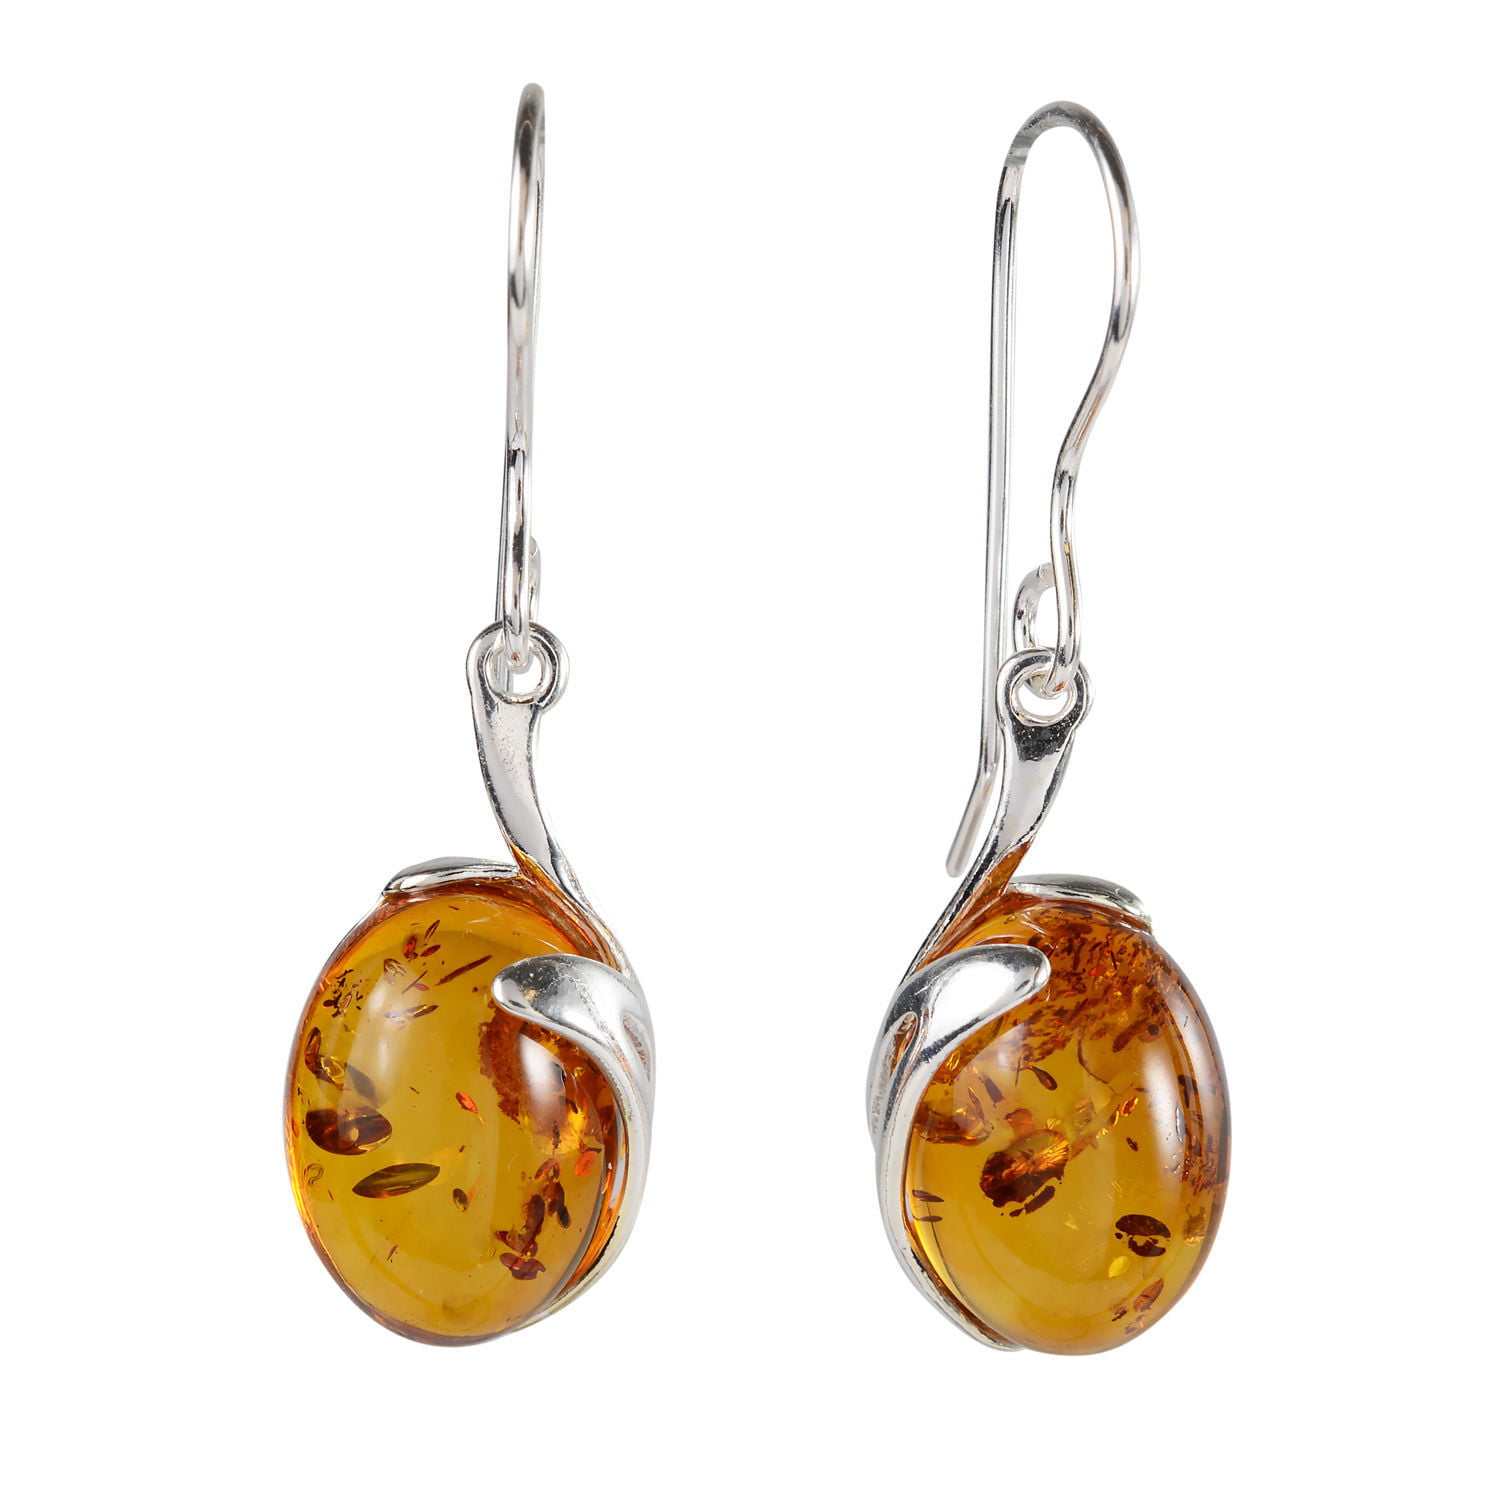 BALTIC HONEY GREEN or PALE YELLOW AMBER & STERLING SILVER EURO HOOK EARRINGS 